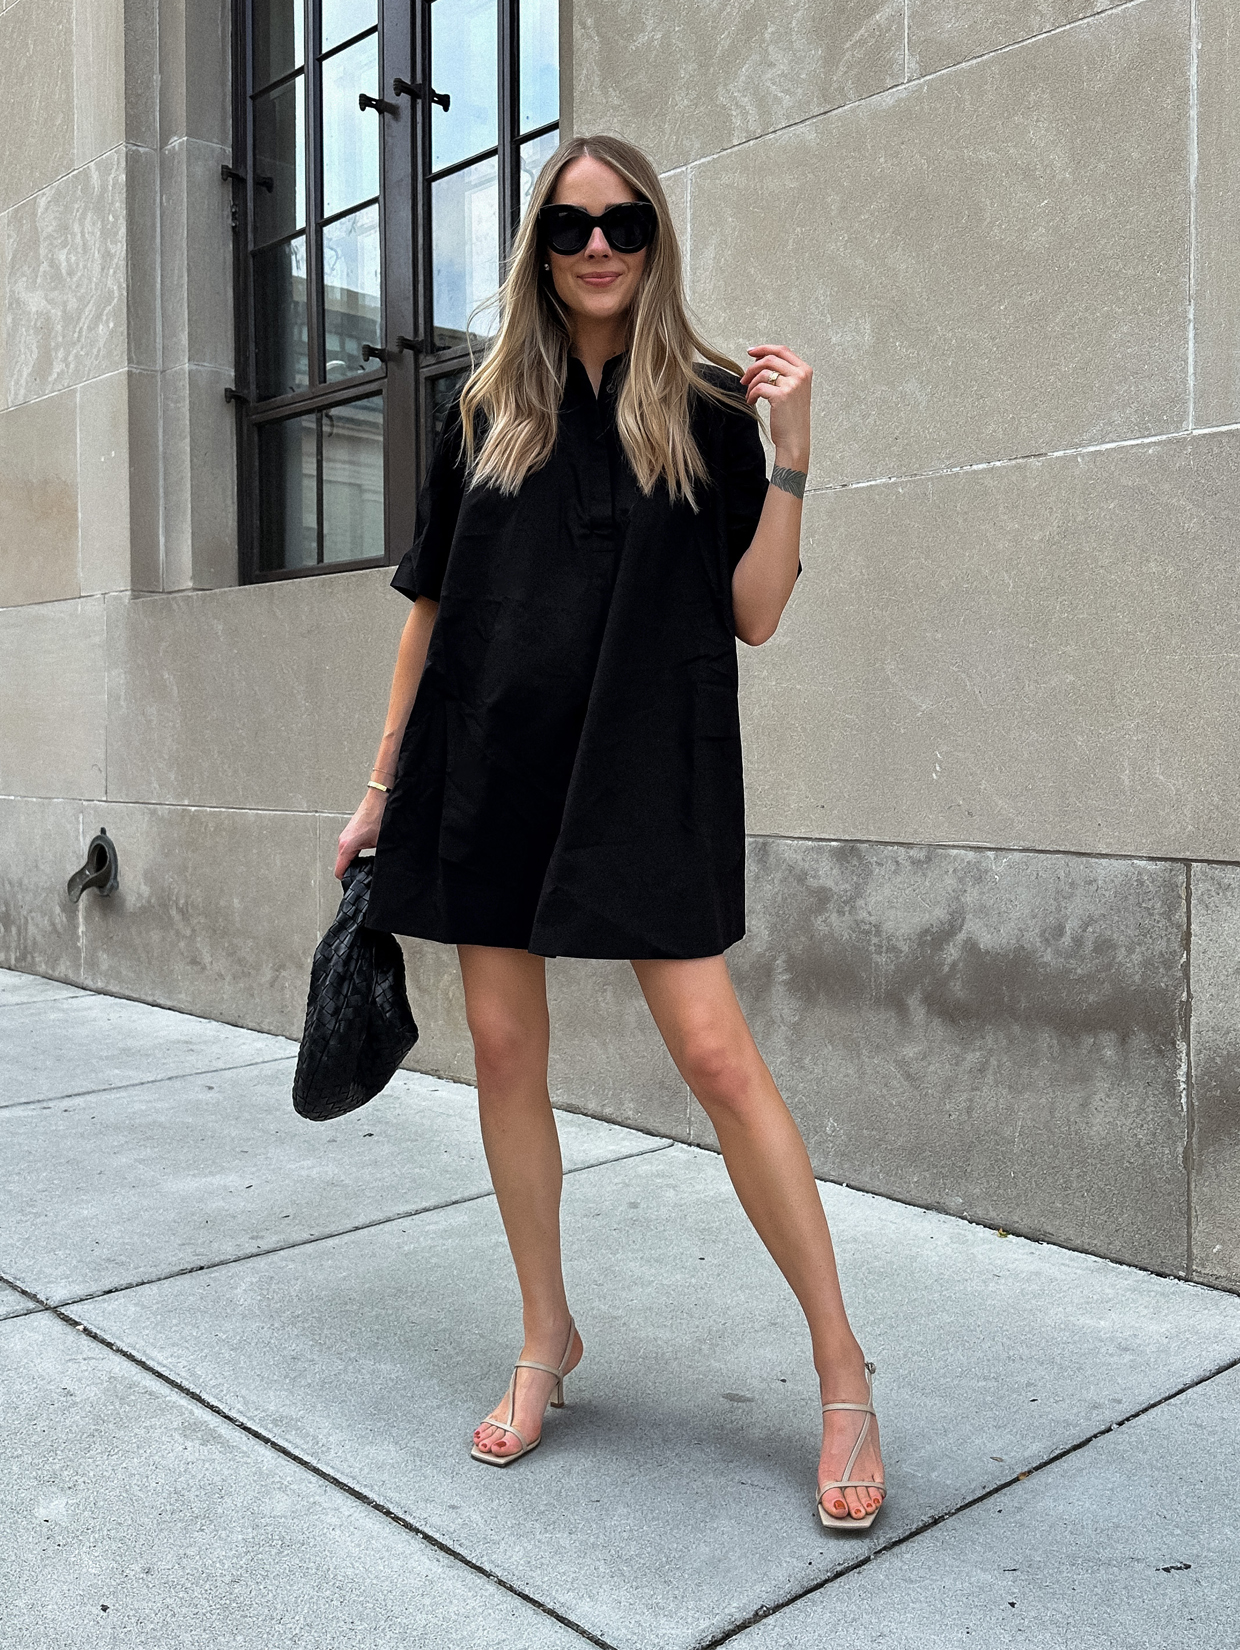 How to Accessorize a Black Dress - Penny Pincher Fashion